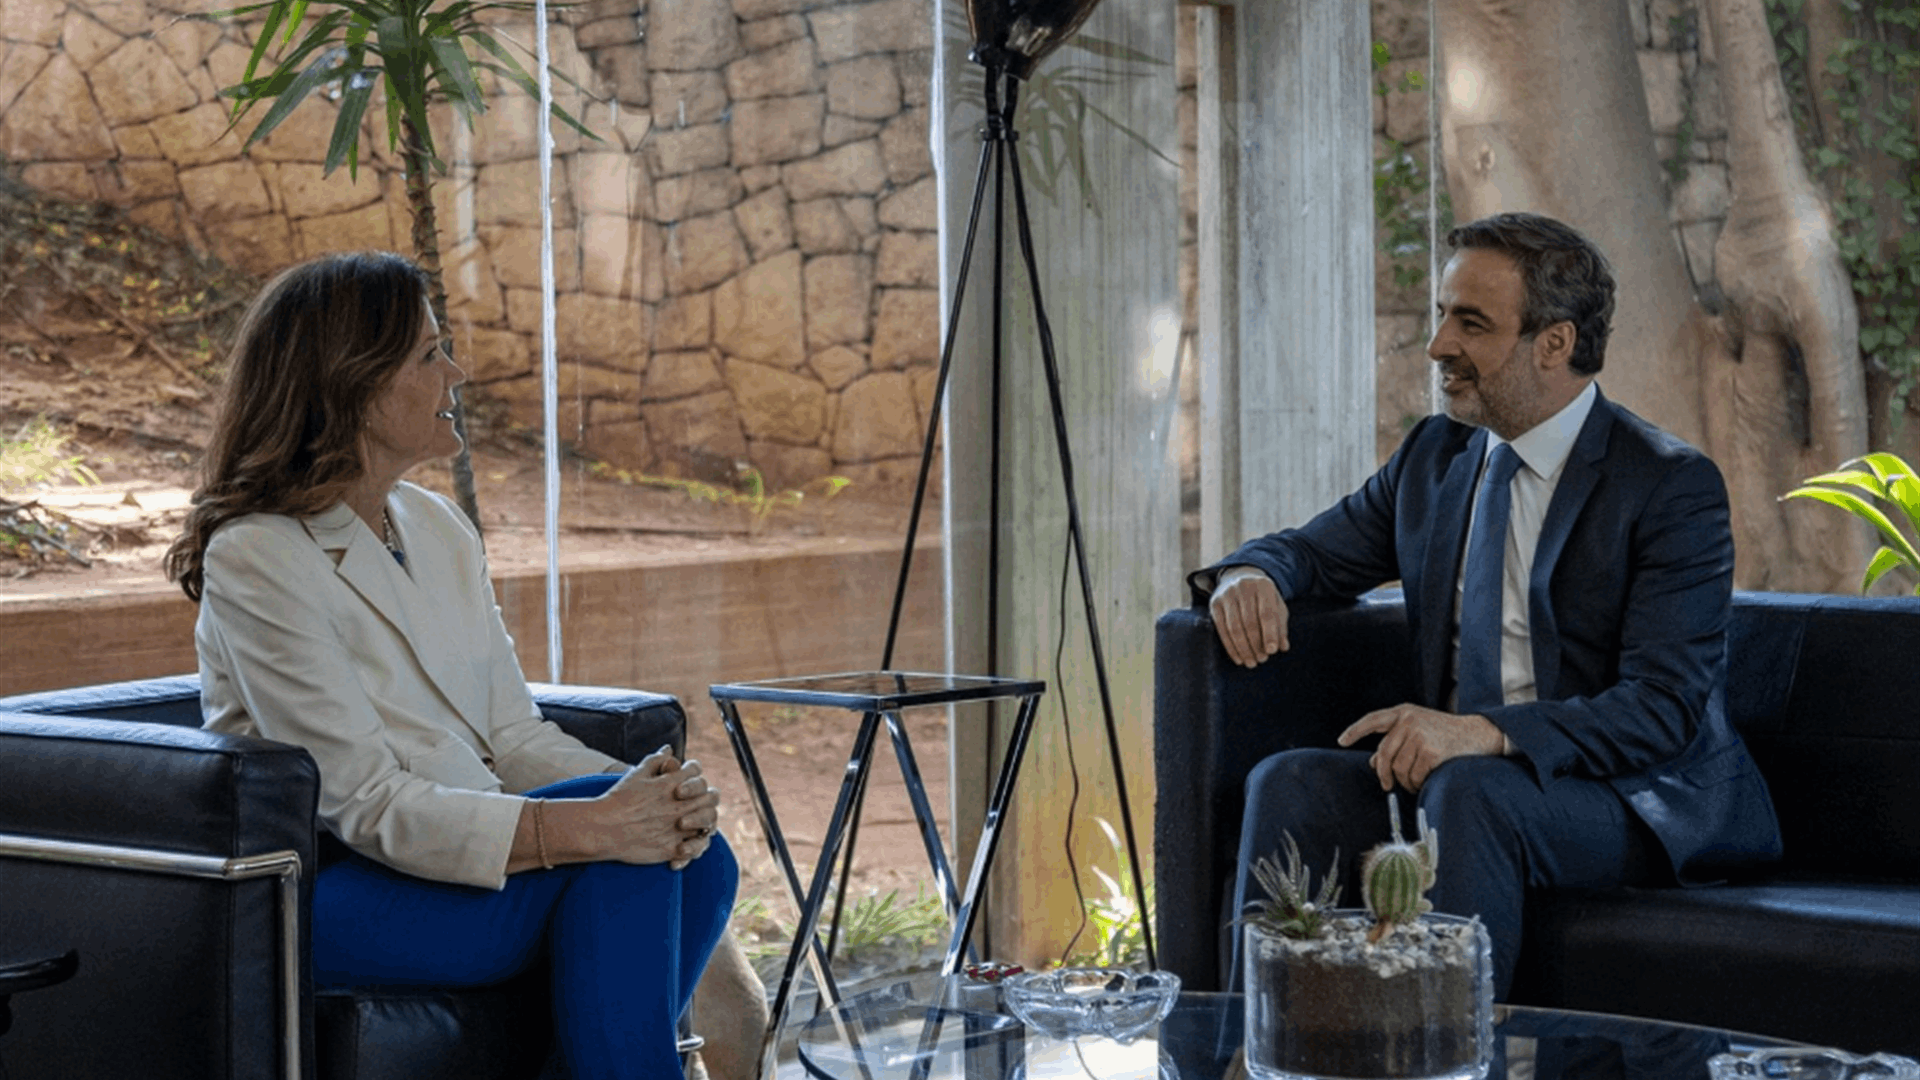 MP Michel Moawad discusses presidential election with US Ambassador Shea